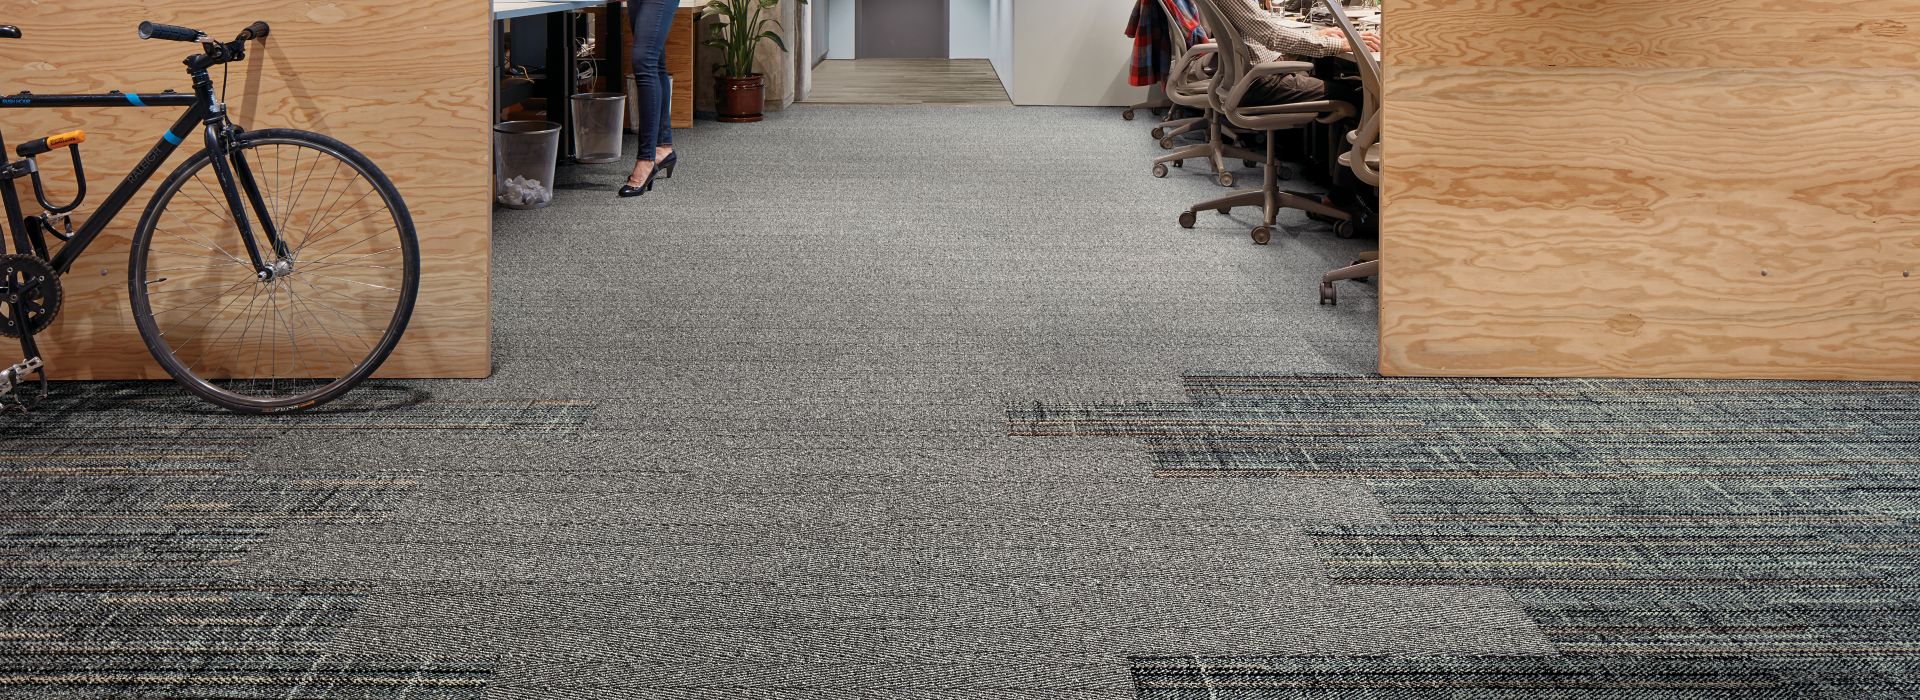 Interface French Seams and Stitch in Time plank carpet tile and Textured Woodgrains LVT with workstations